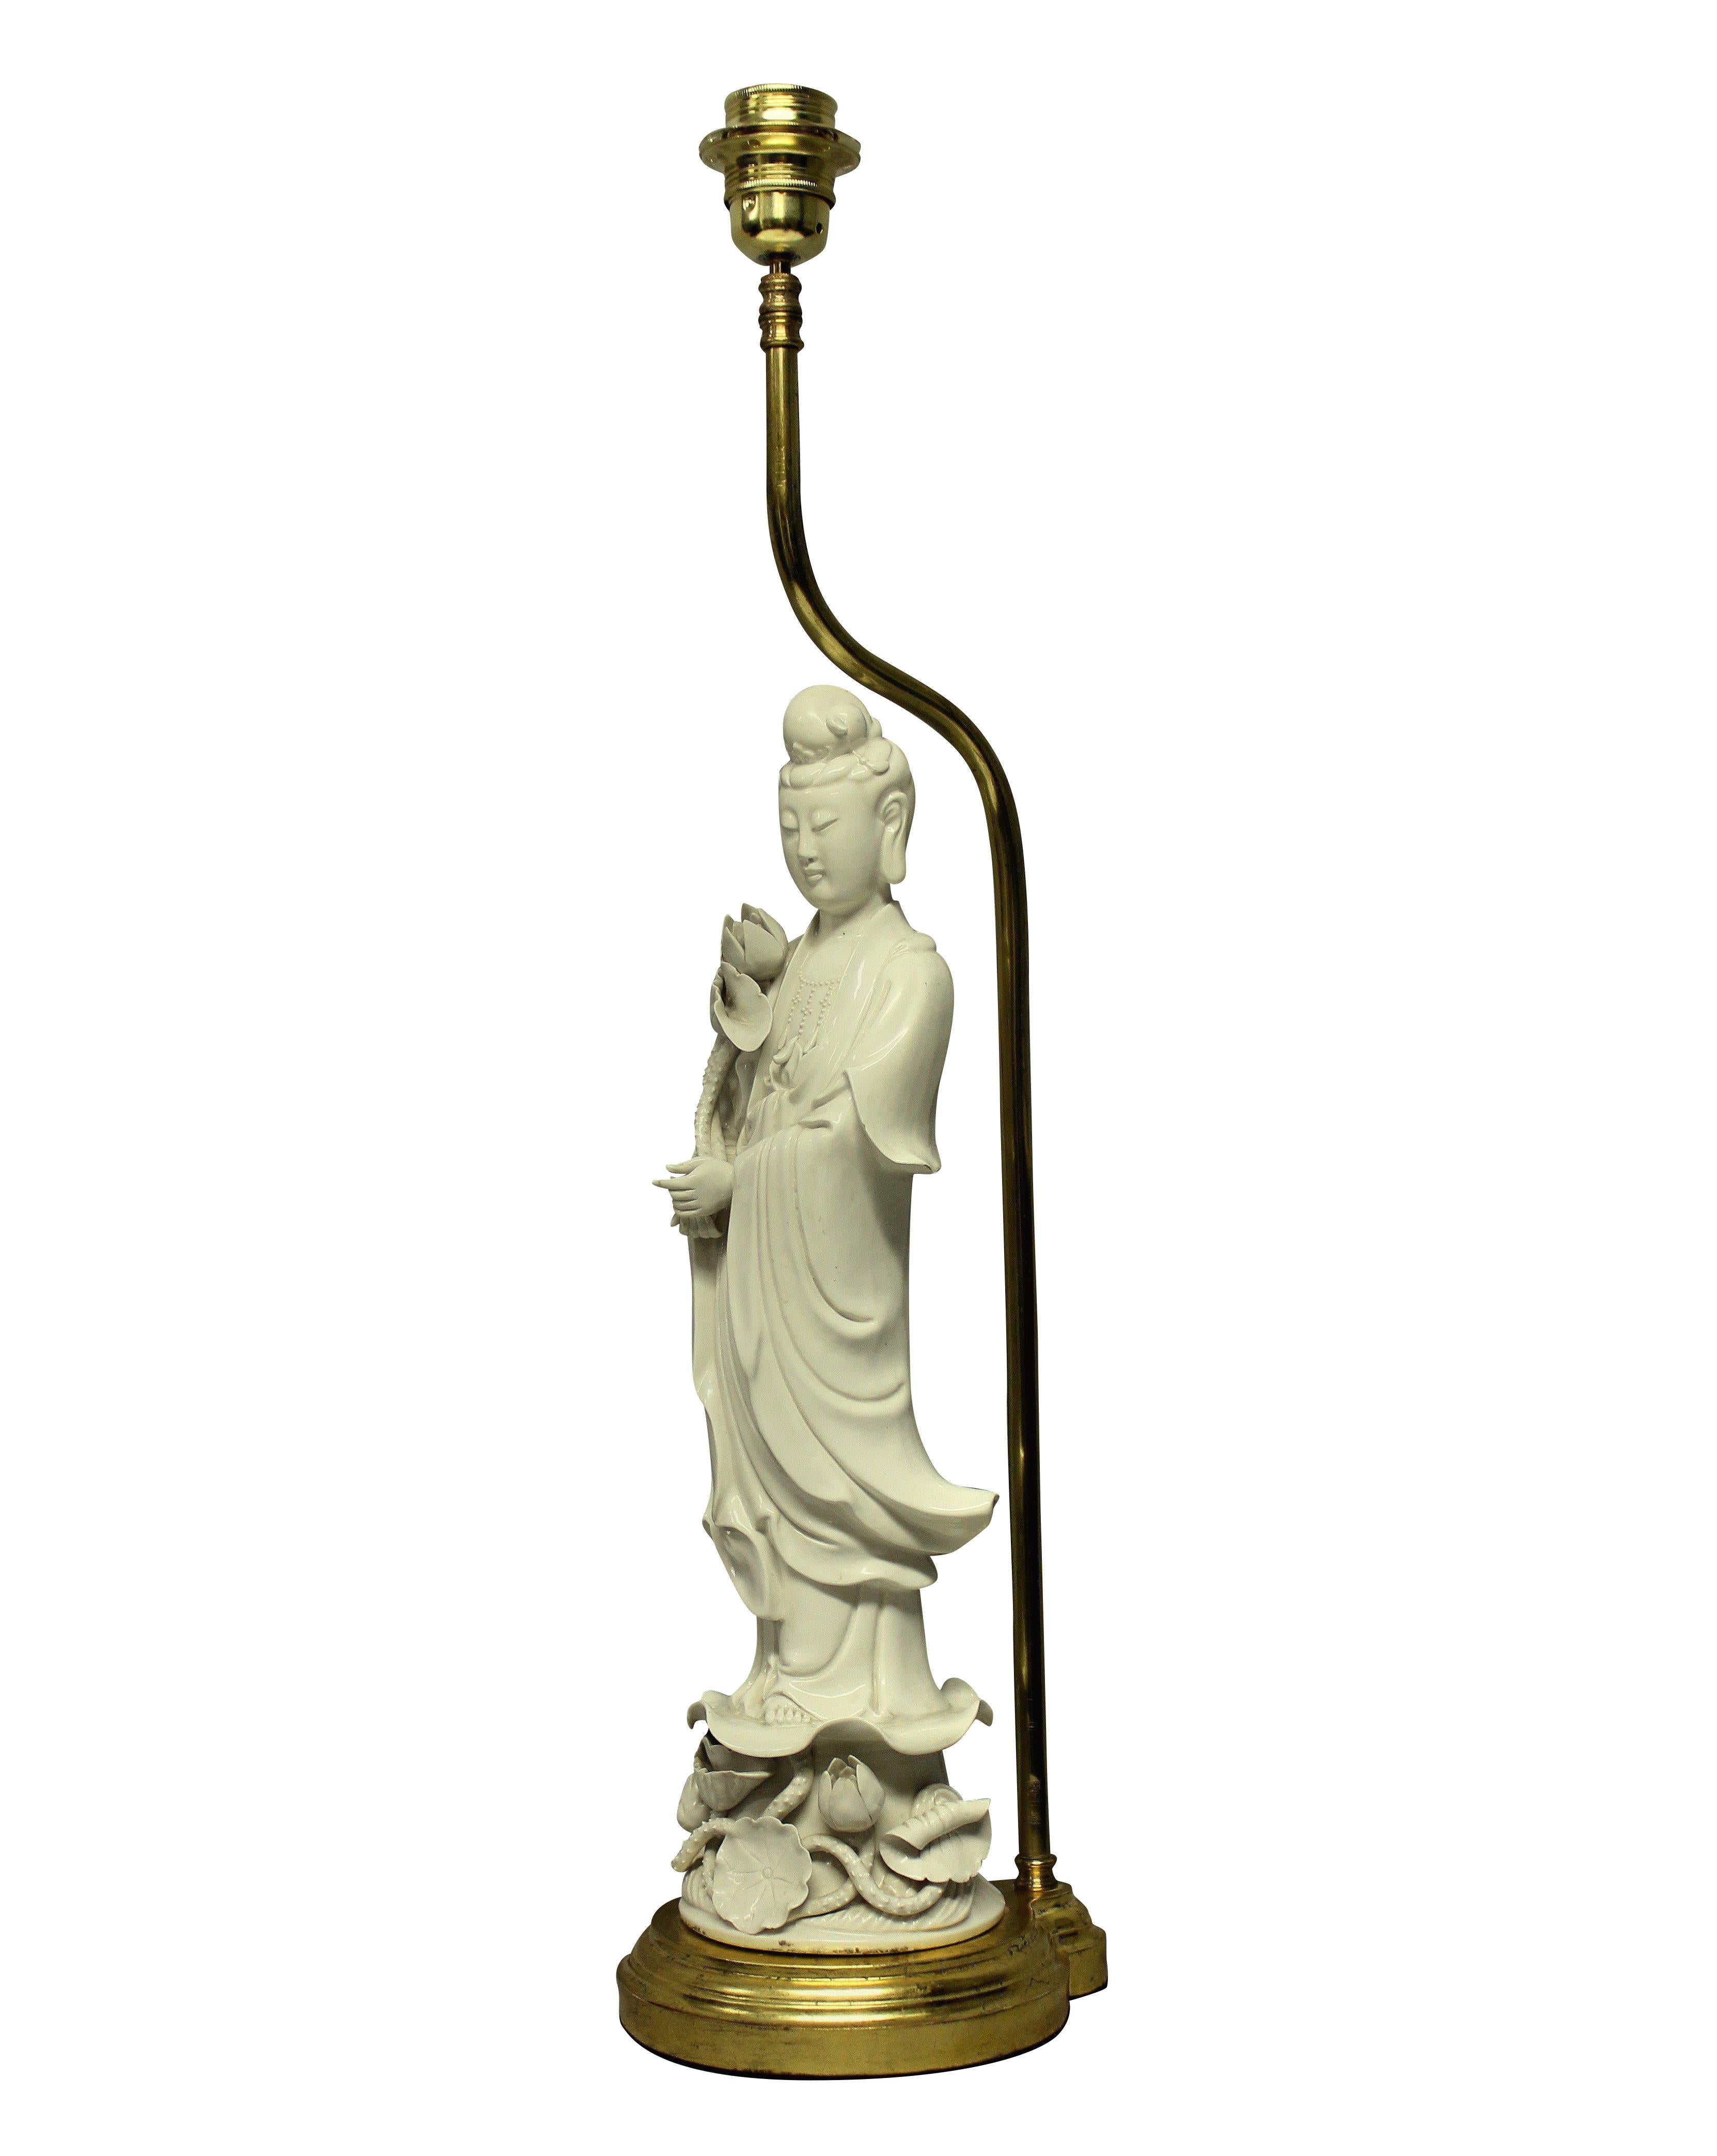 A fine French blanc de chine porcelain table lamp in the oriental manner. Depicting a Chinese lady standing upon a water gilded base.